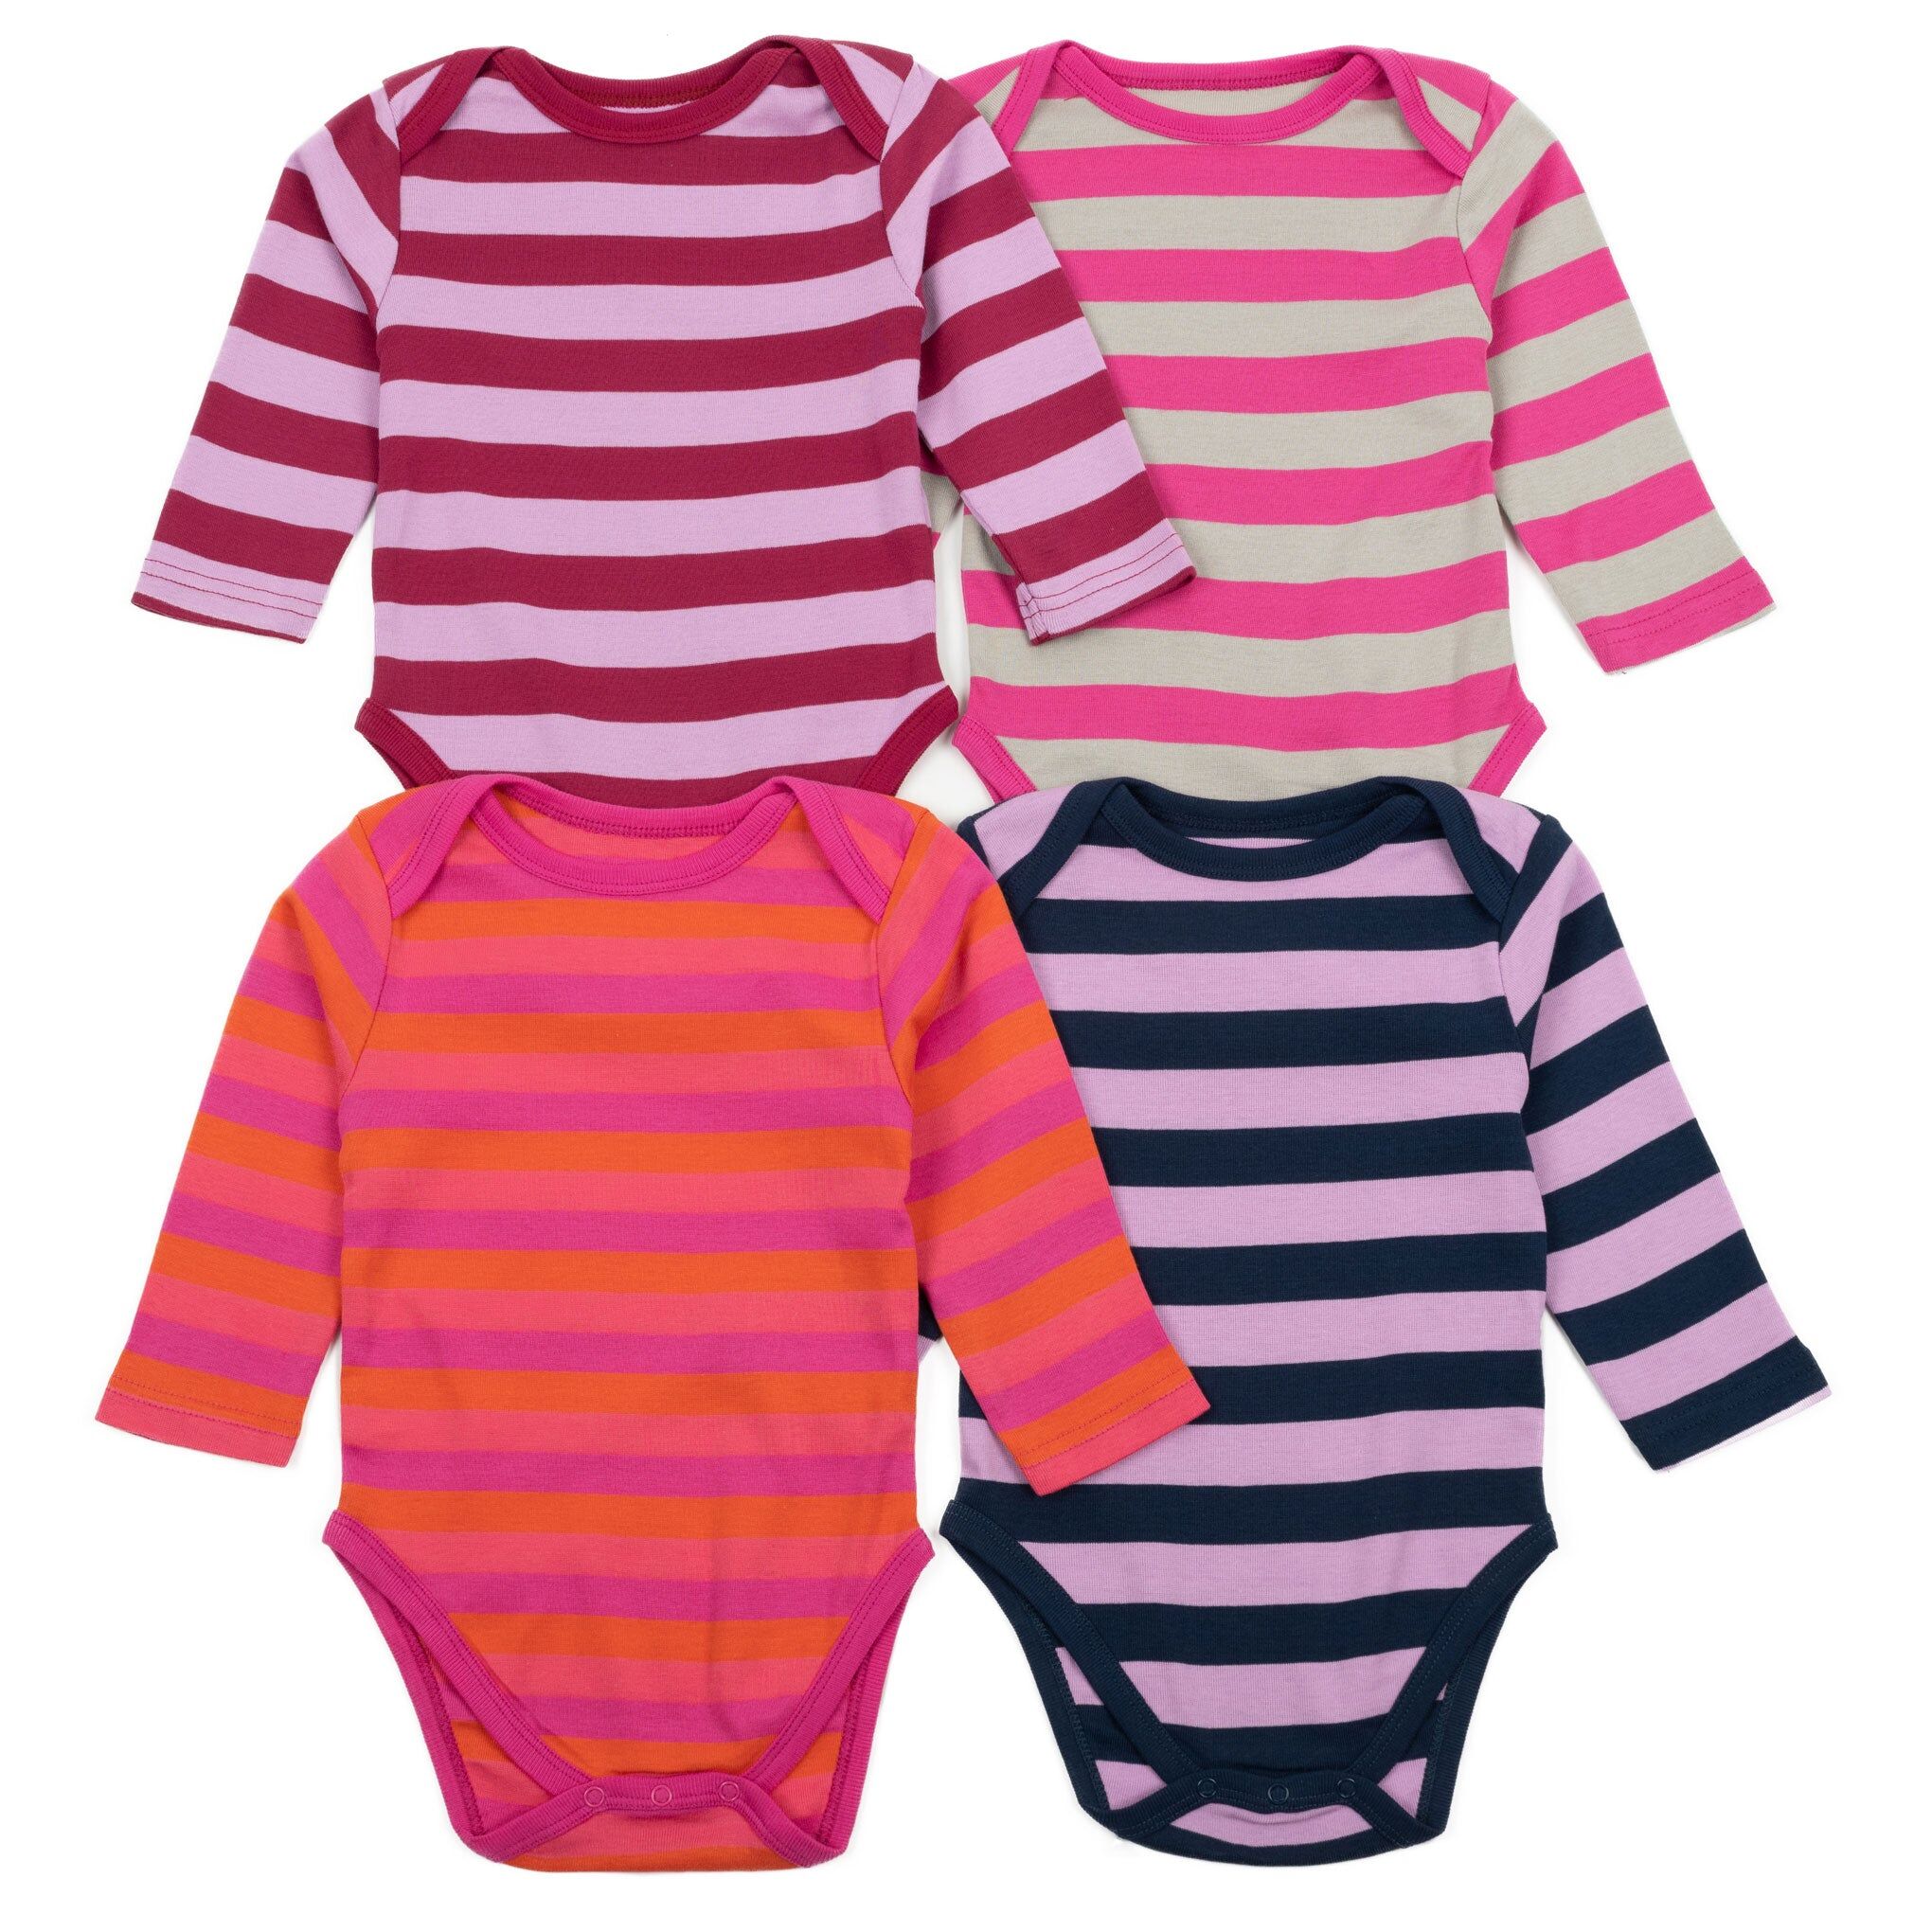 Leveret Baby Four Pack Long Sleeve Bodysuit 18-24 Months